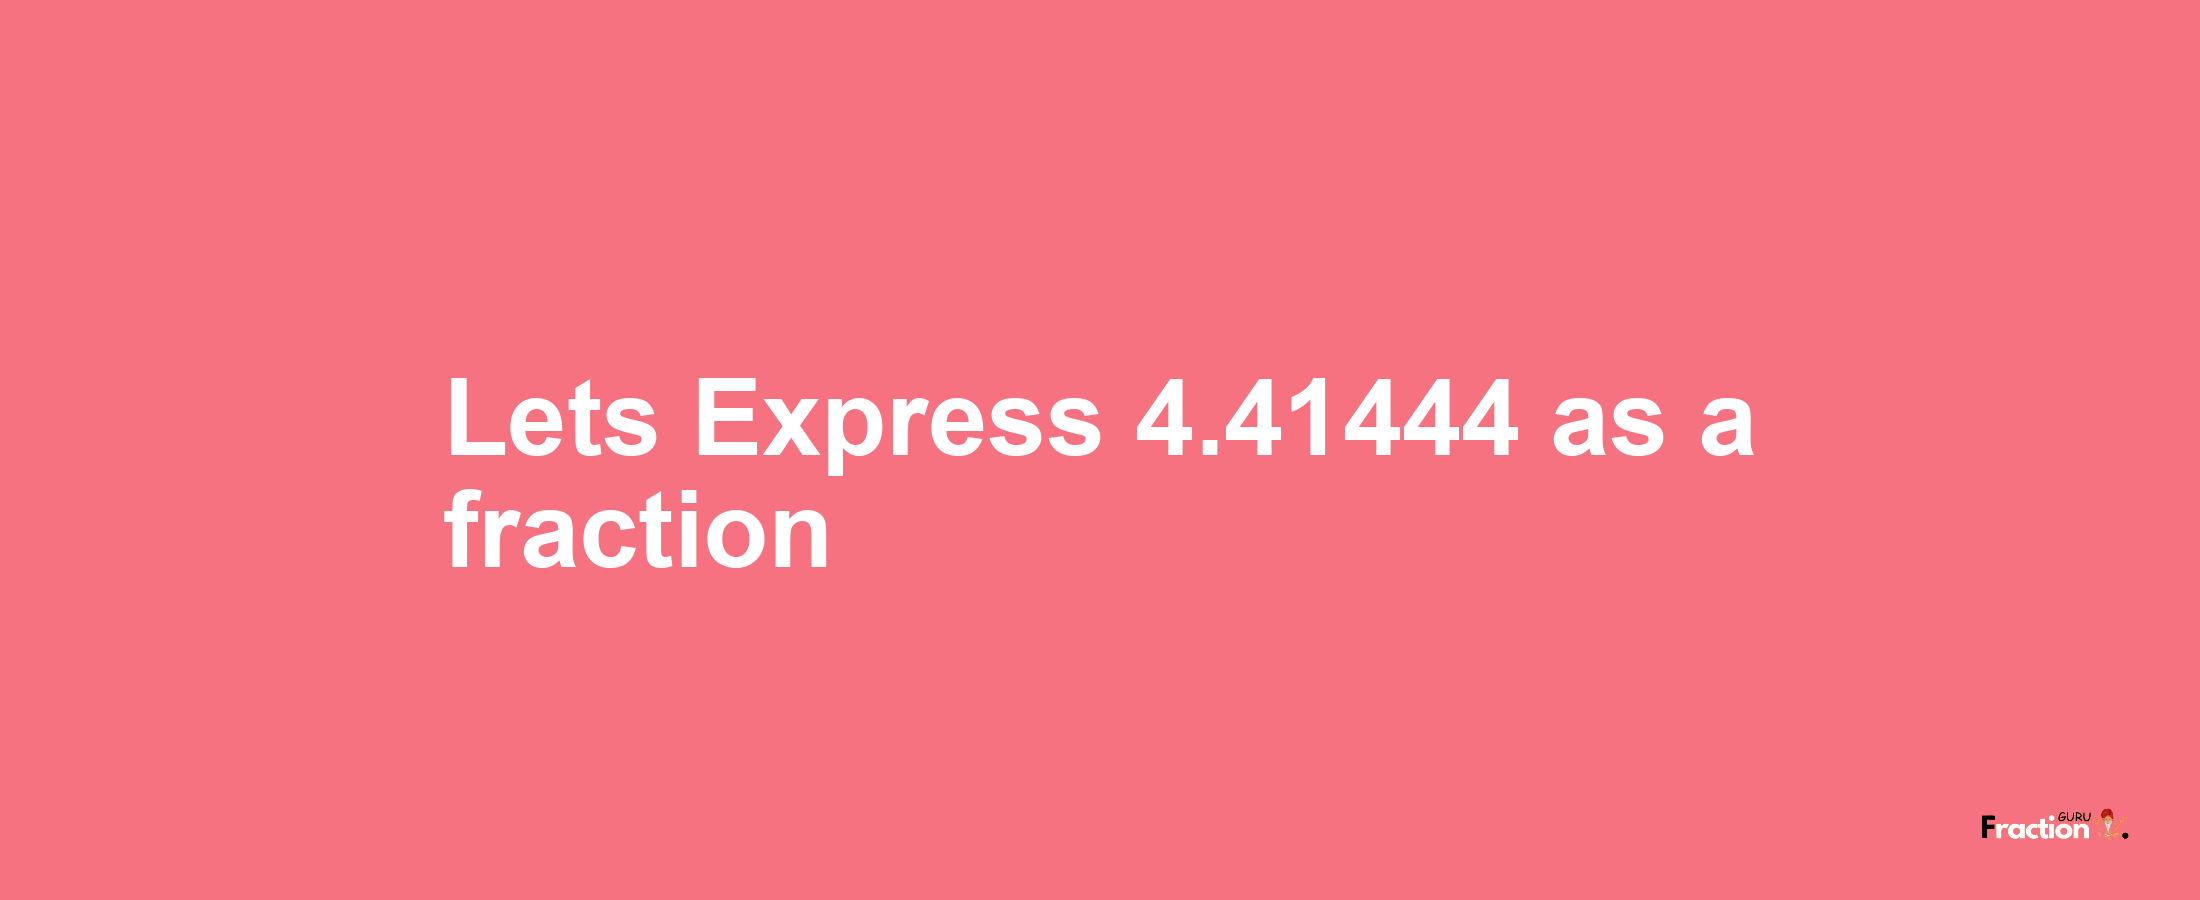 Lets Express 4.41444 as afraction